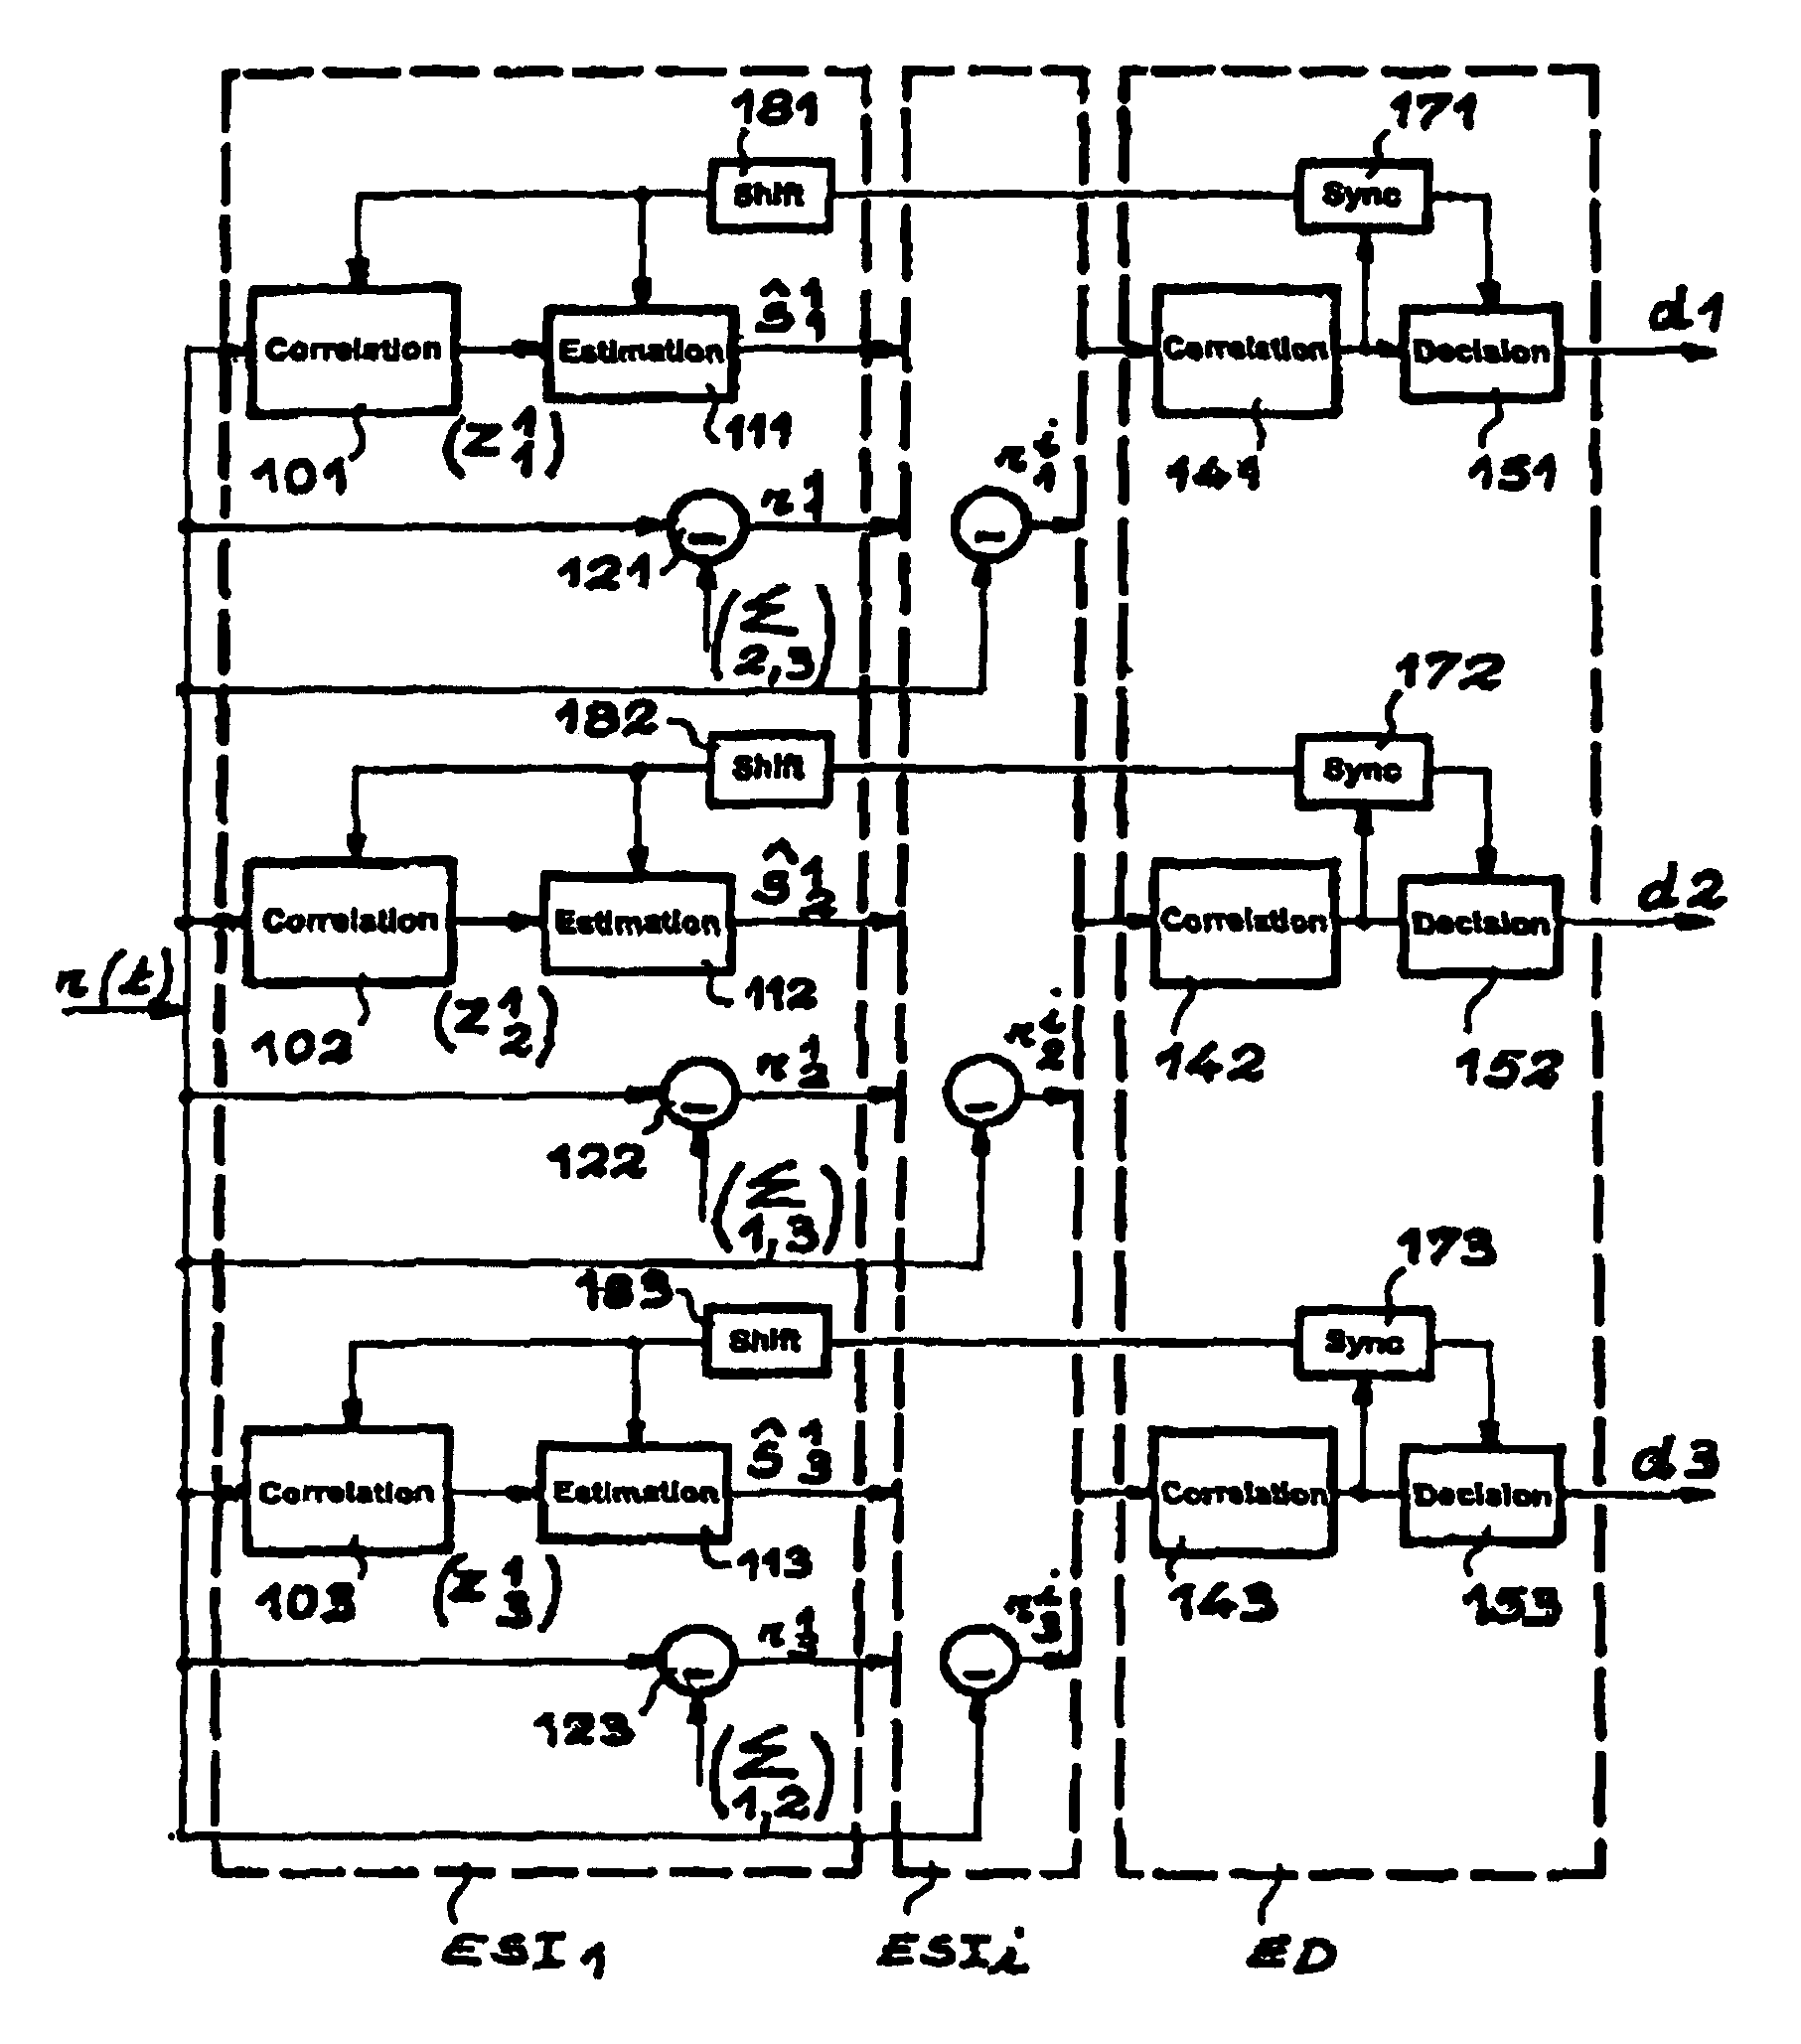 CDMA receiver with parallel interference suppression and optimized synchronization